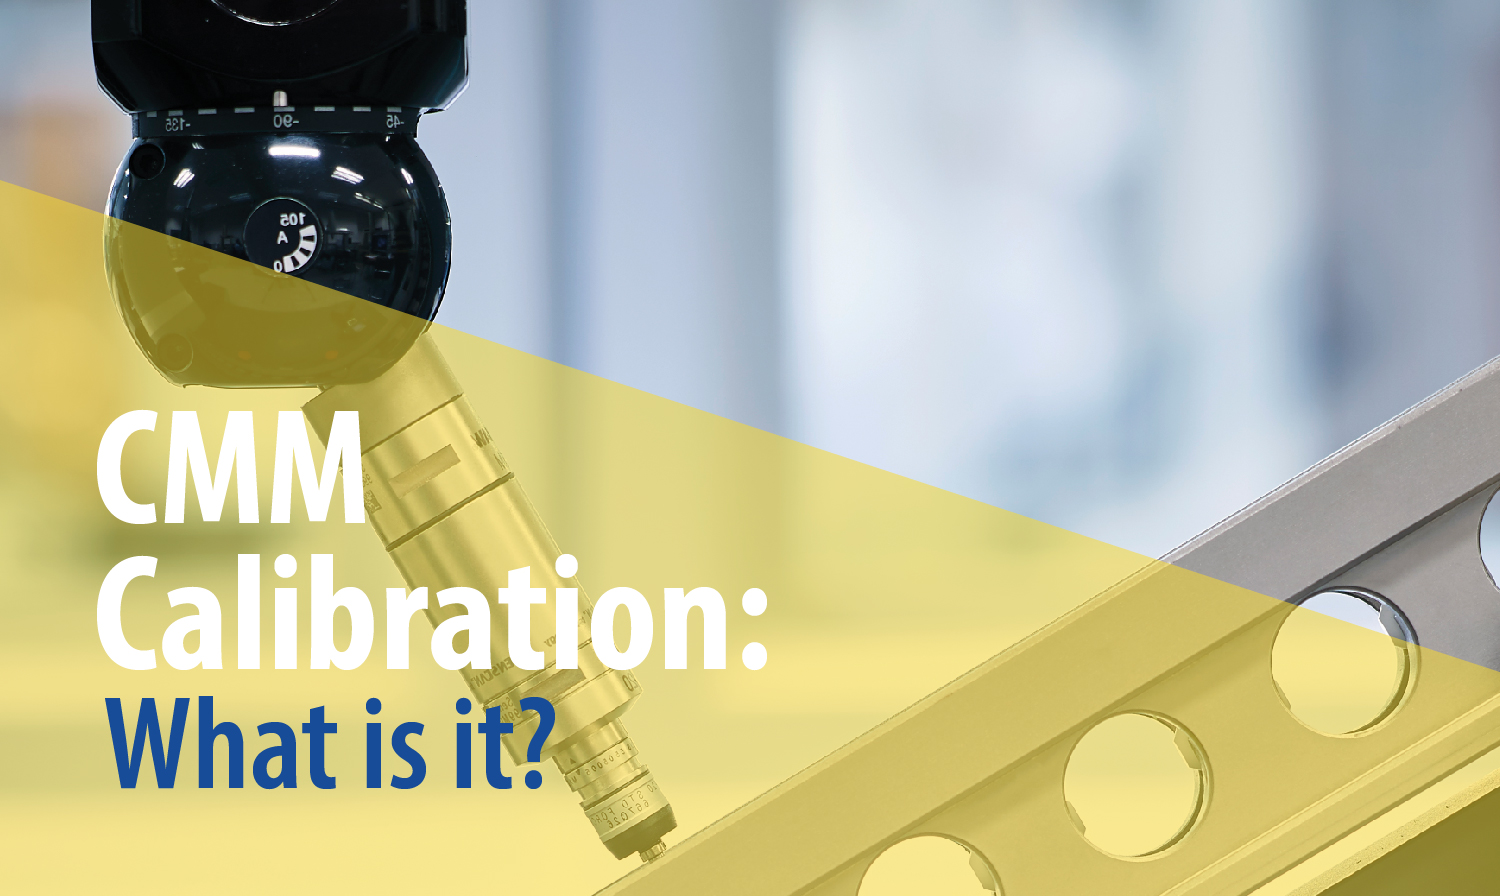 SO WHAT IS CMM CALIBRATION?